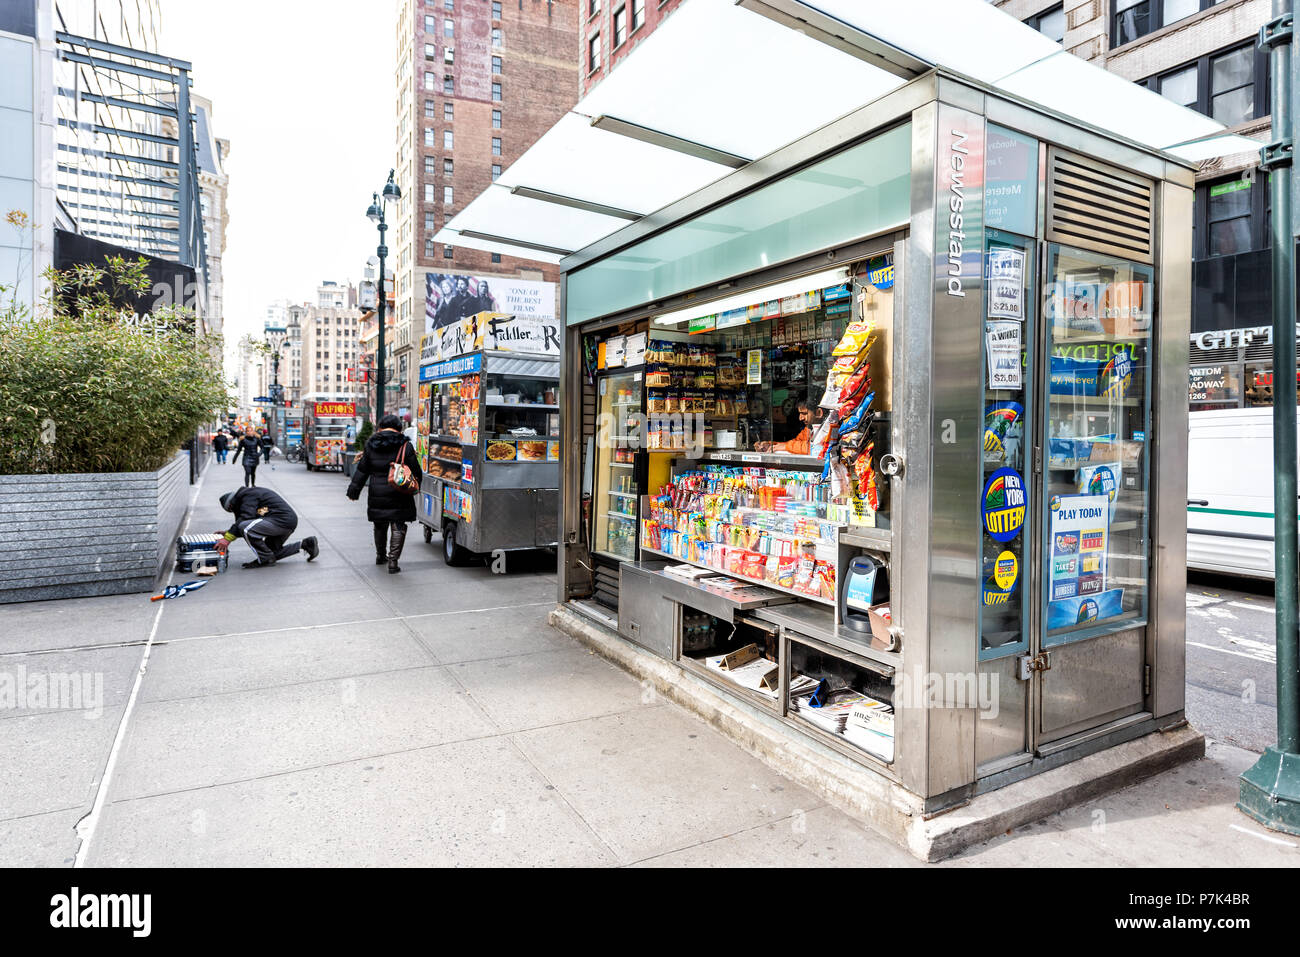 New York City, USA - April 7, 2018: Midtown Manhattan with street sidewalk on Broadway, Newsstand with newspaper, magazines, candy Stock Photo